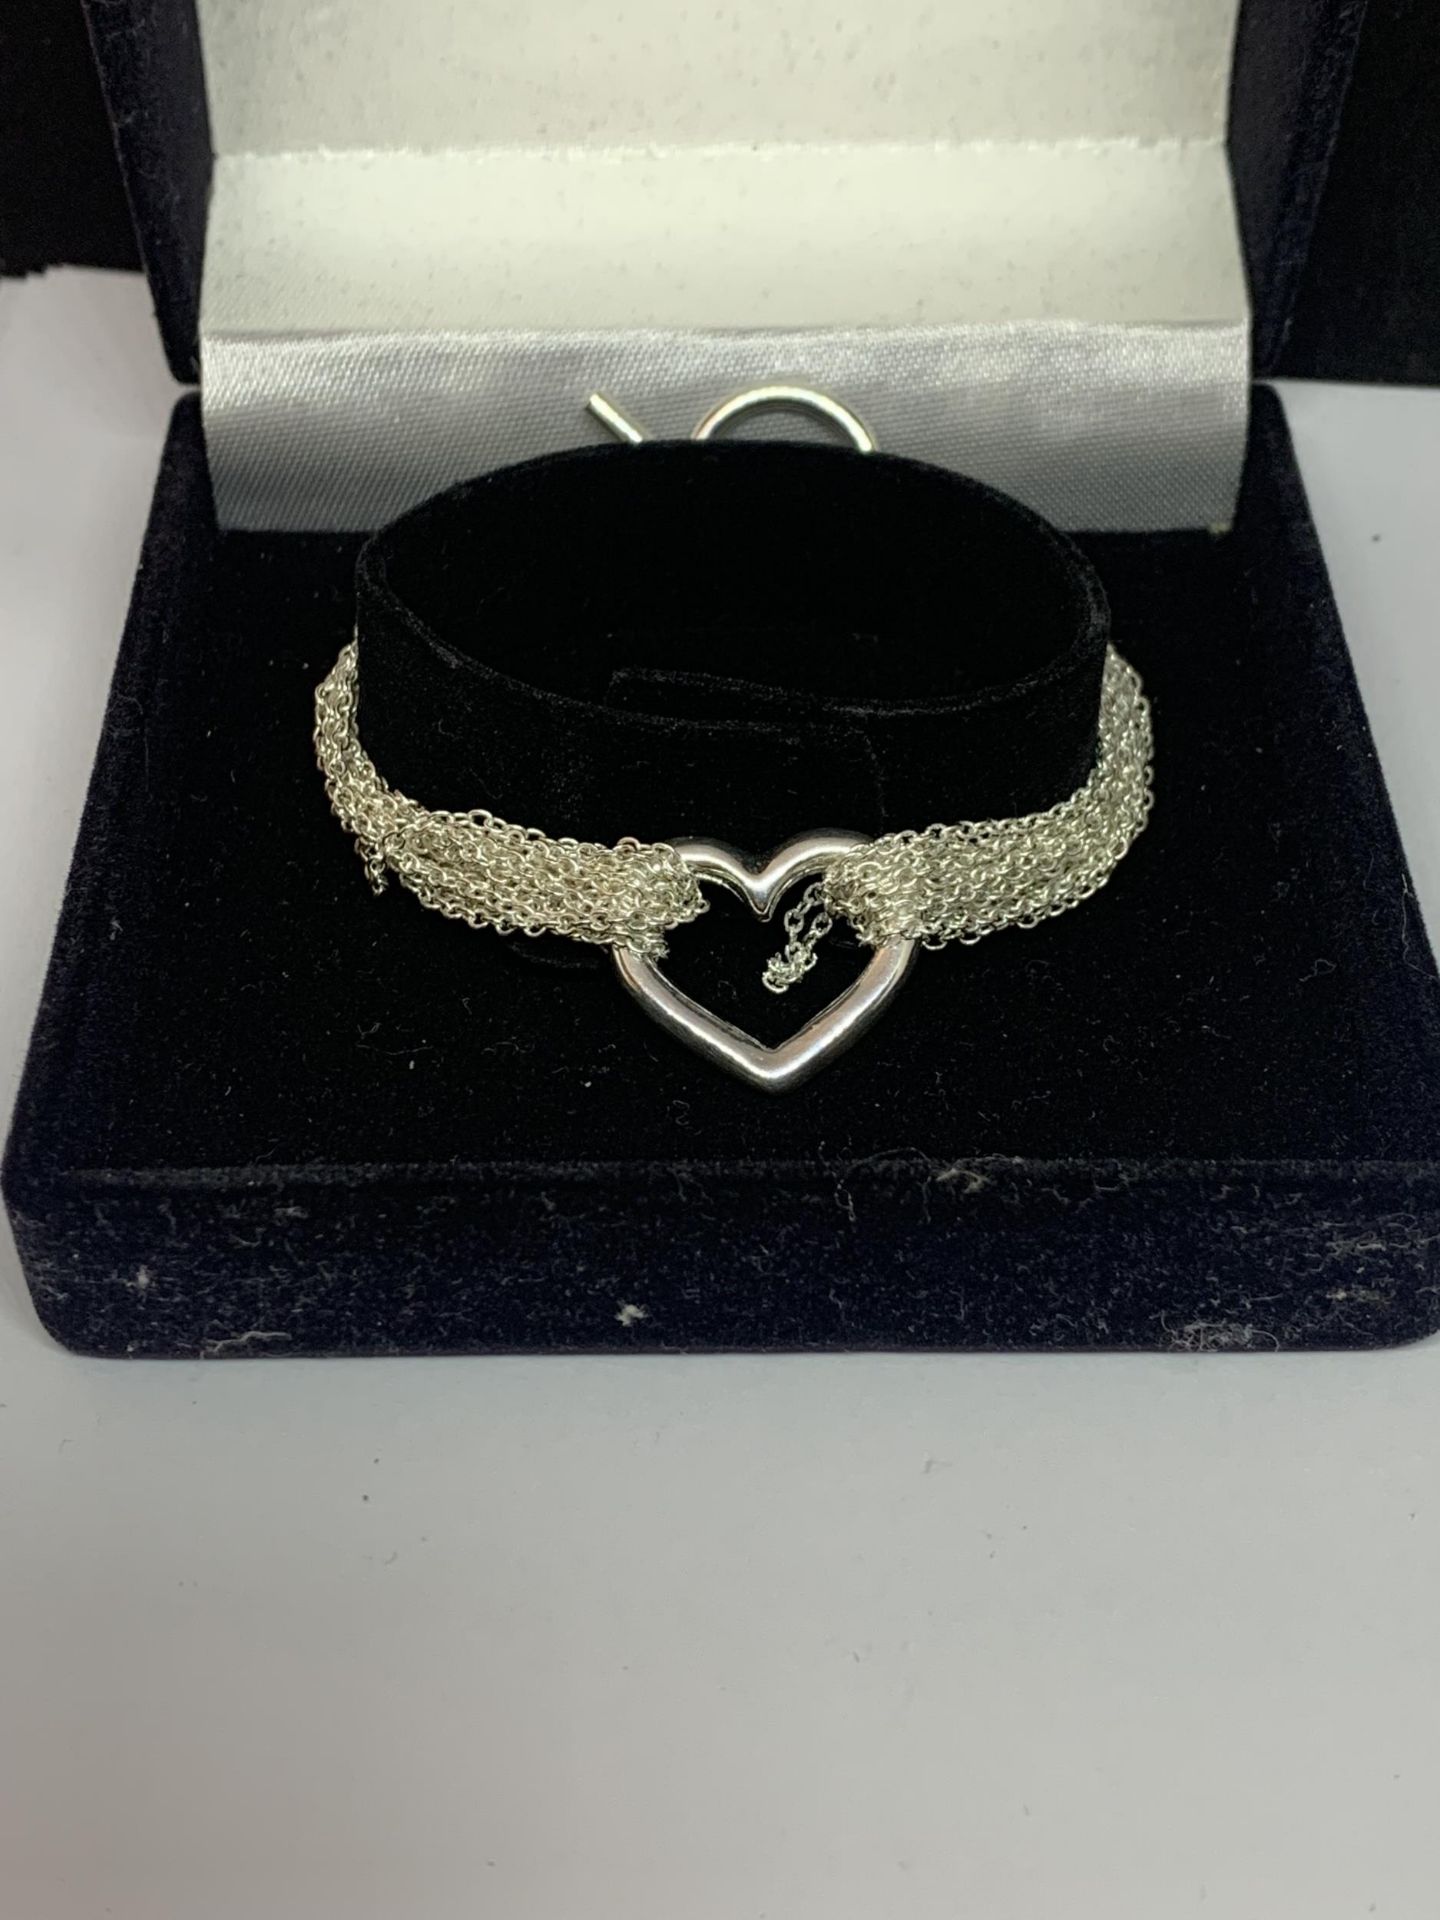 A SILVER HEART BRACELET IN A PRESENTATION BOX - Image 5 of 5